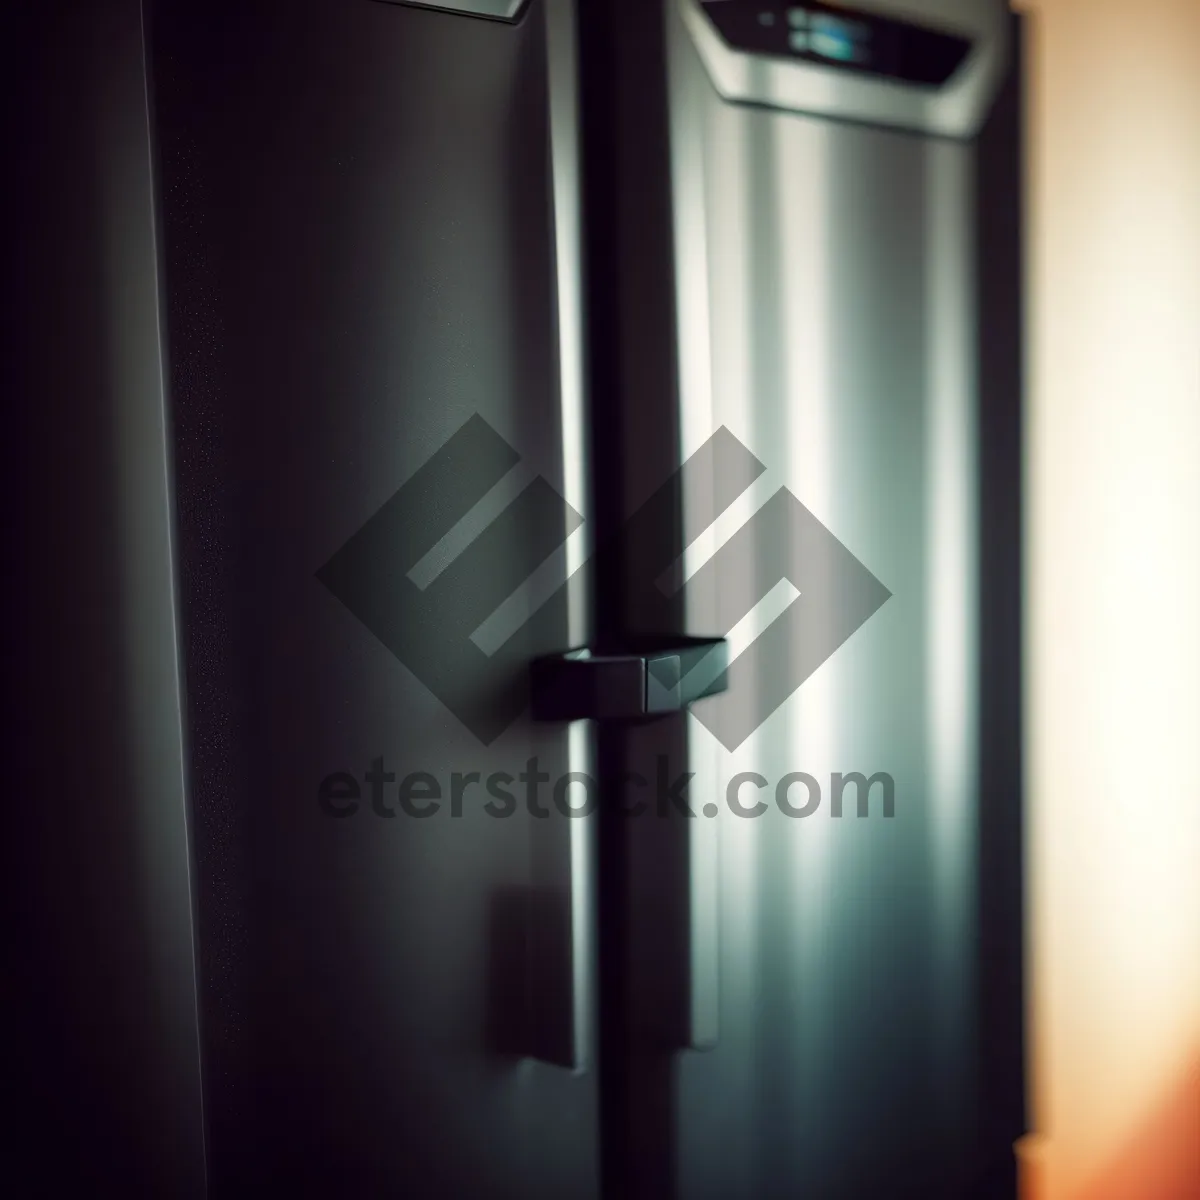 Picture of Modern Home Appliance: White Goods Refrigerator with Floor Lamp